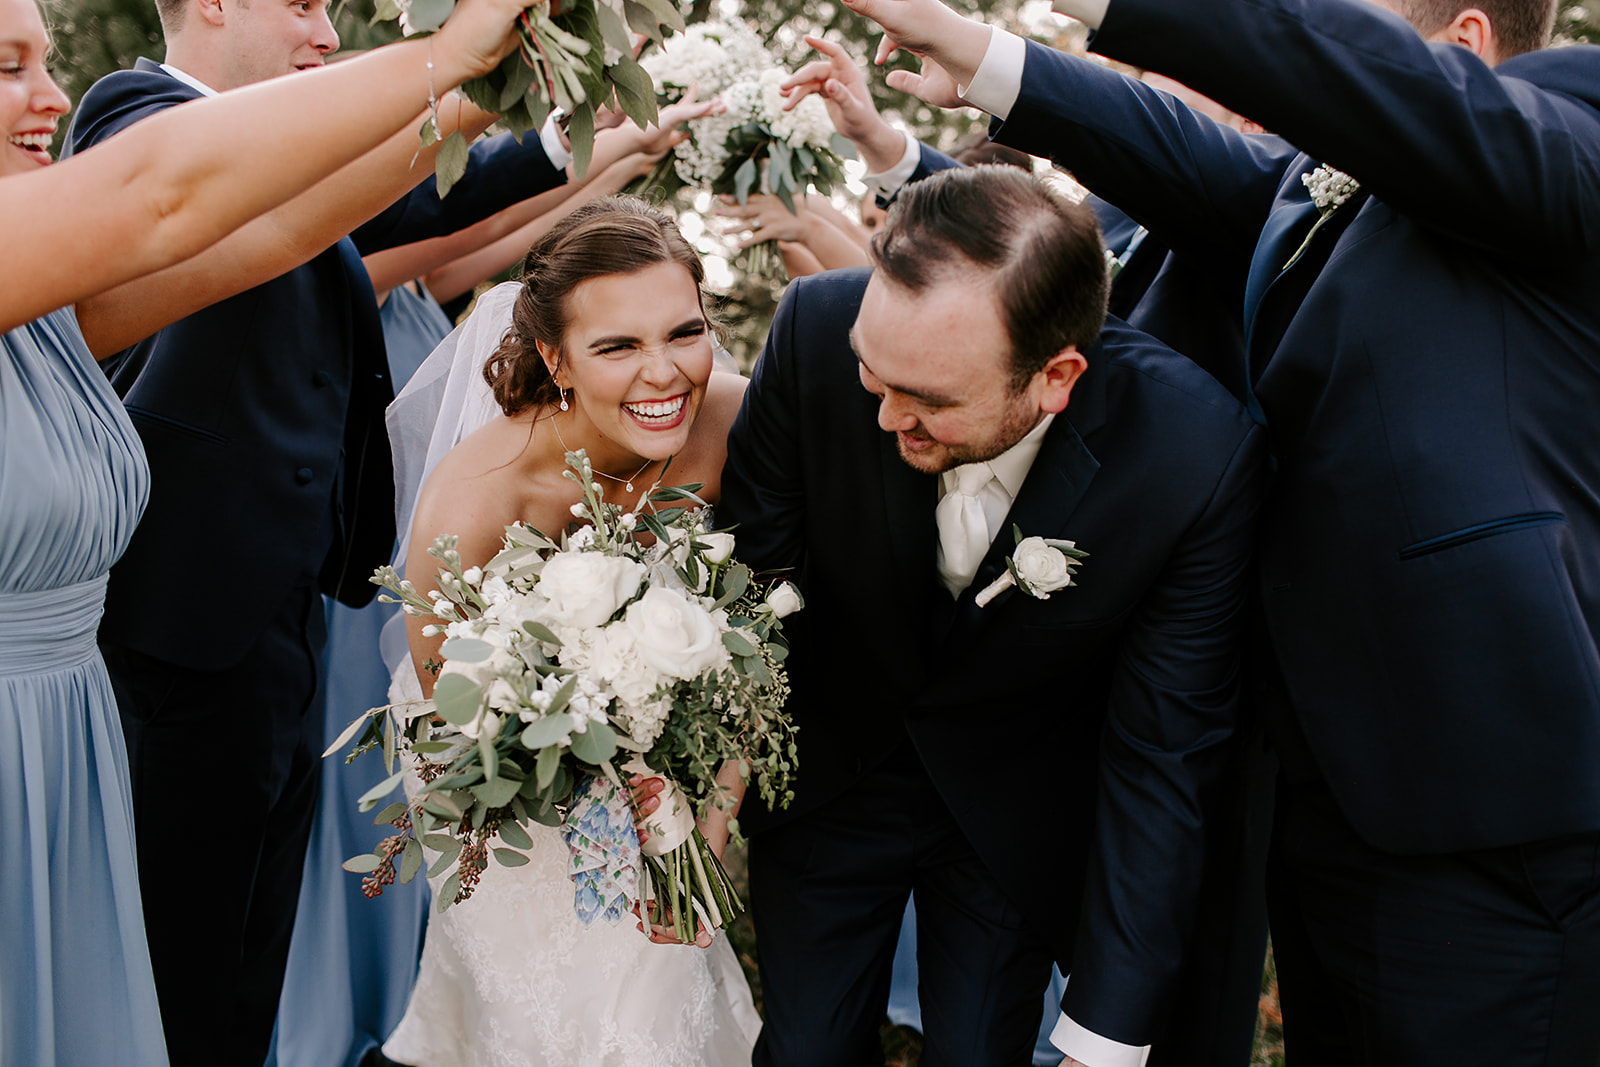 Lauren_and_Andrew_Mustard_Seed_Gardens_Noblesville_Indiana_by_Emily_Wehner_Photography-653.jpg